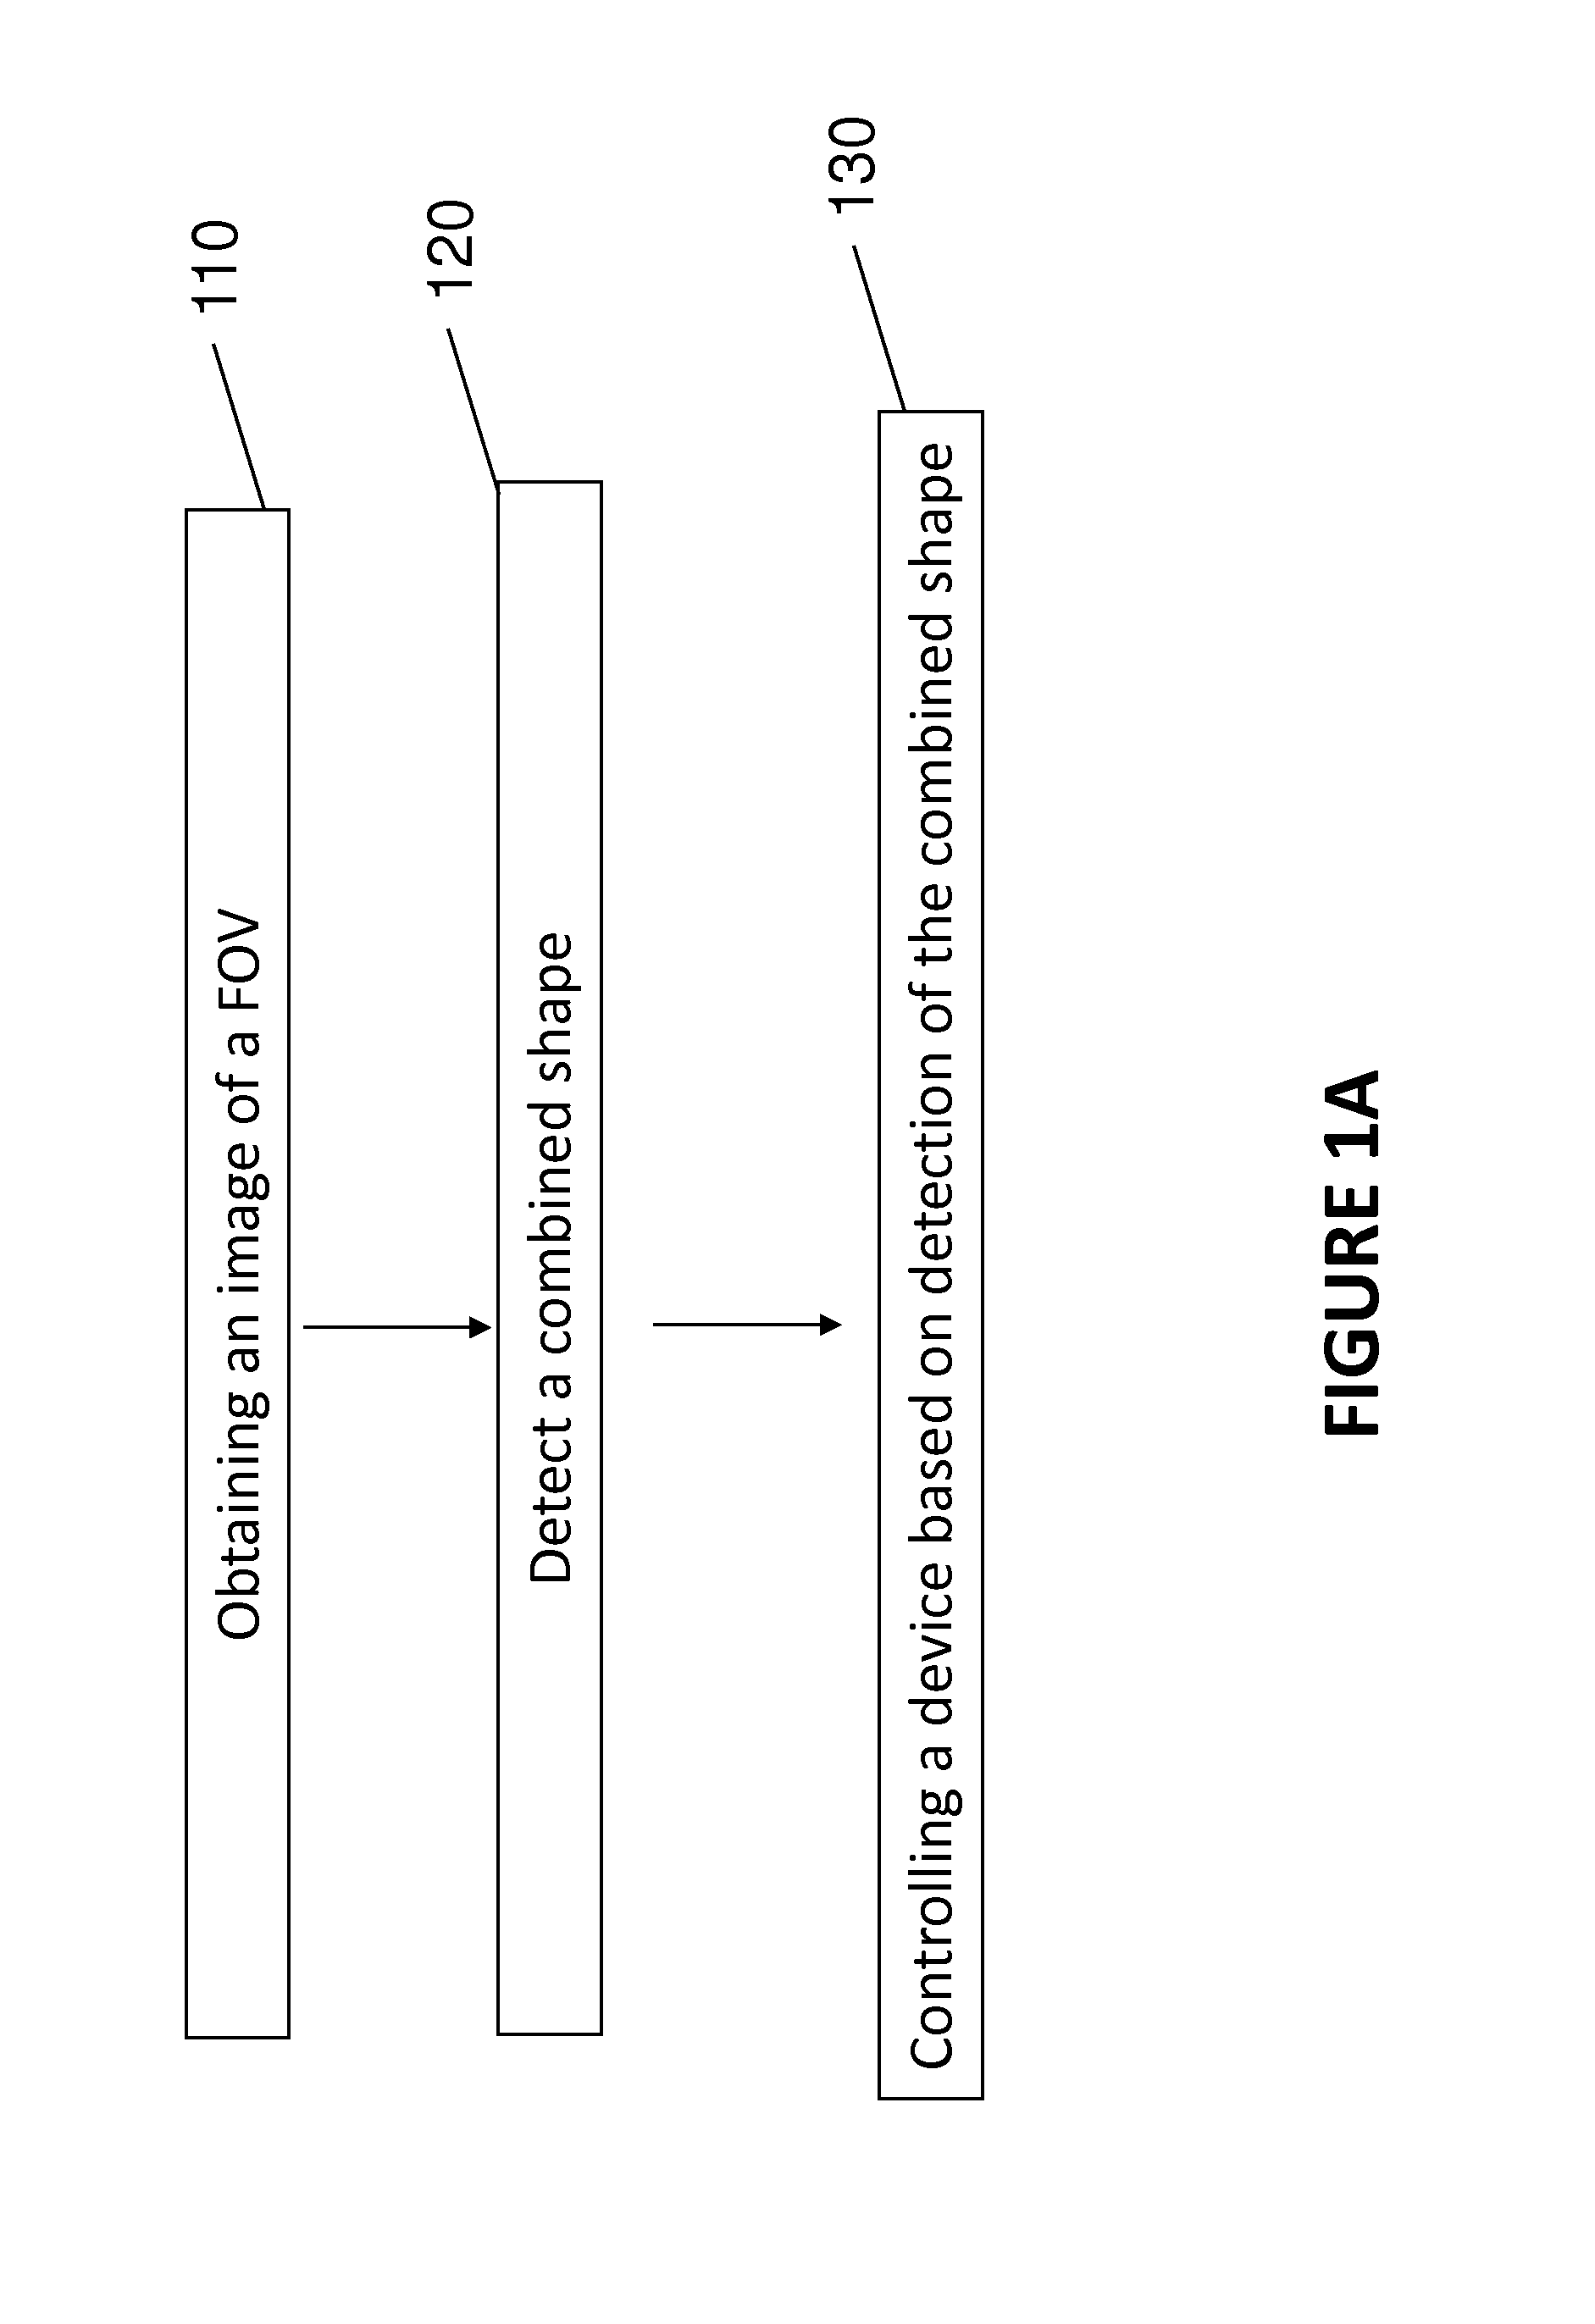 System and method for computer vision control based on a combined shape